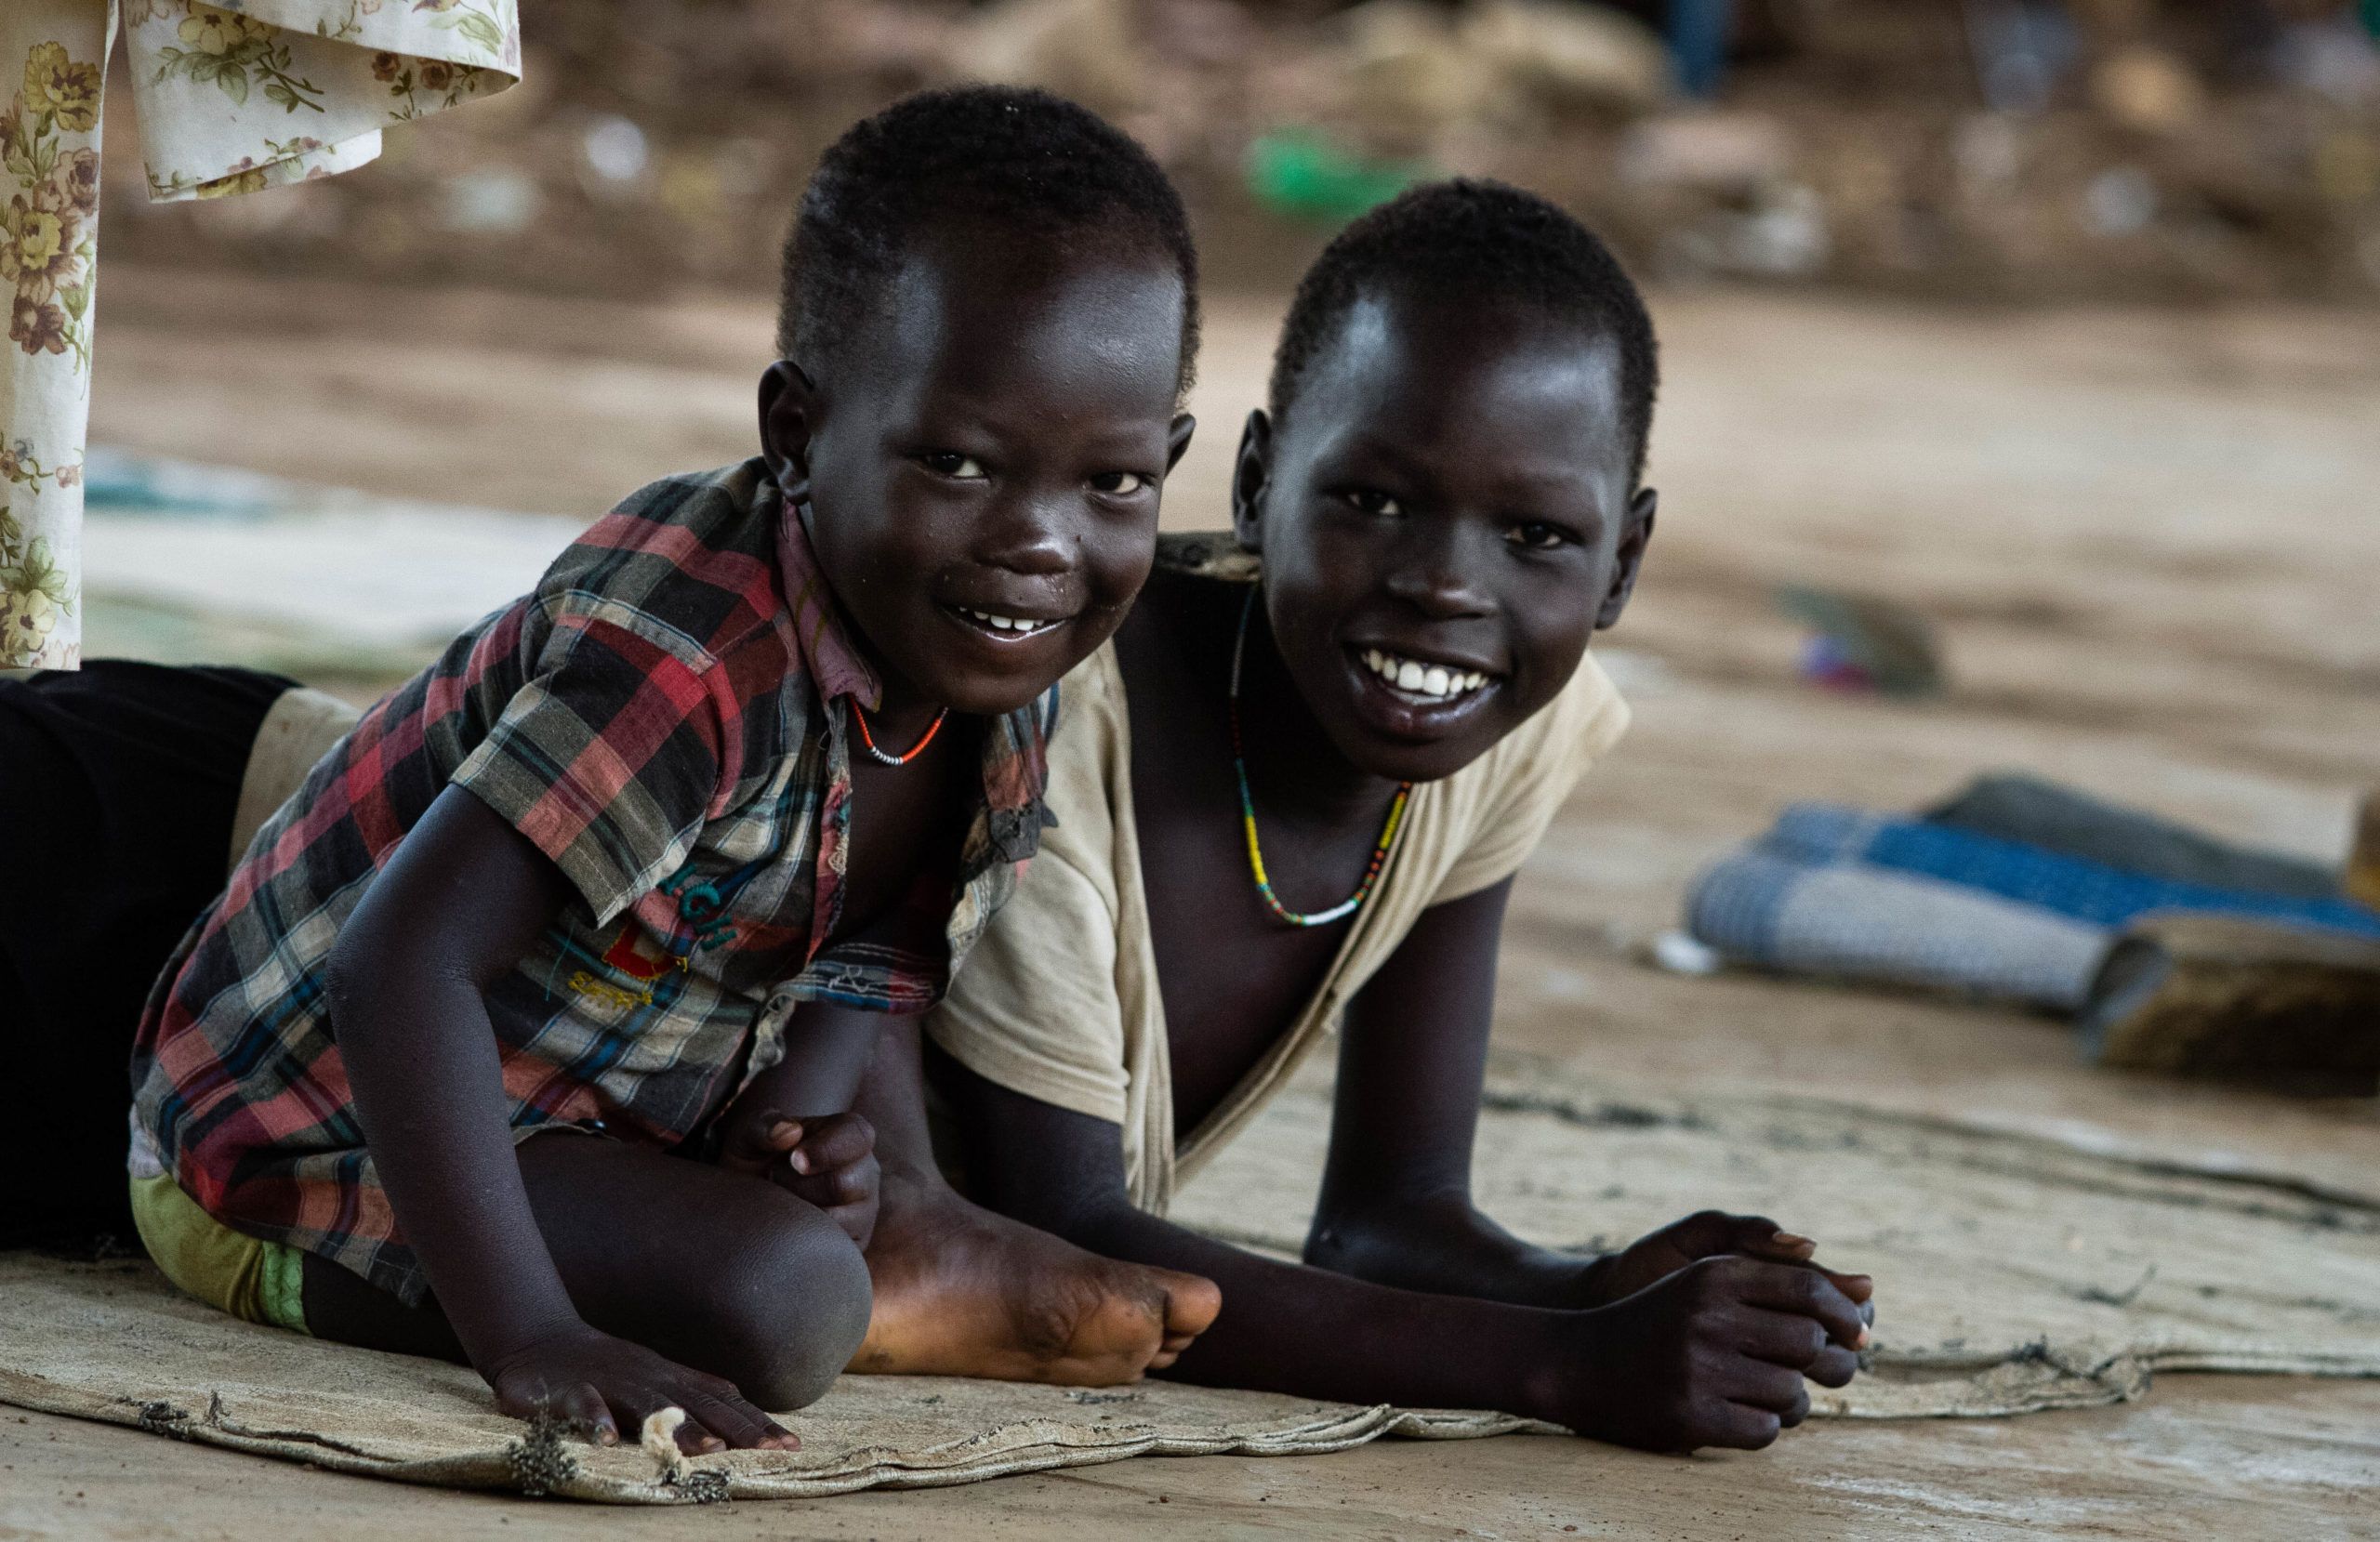 South Sudanese refugees Moach (3) and Nyalam (10) at GOAL’s nutrition programme in Pamdong transitional camp in Gambella, Ethiopia.